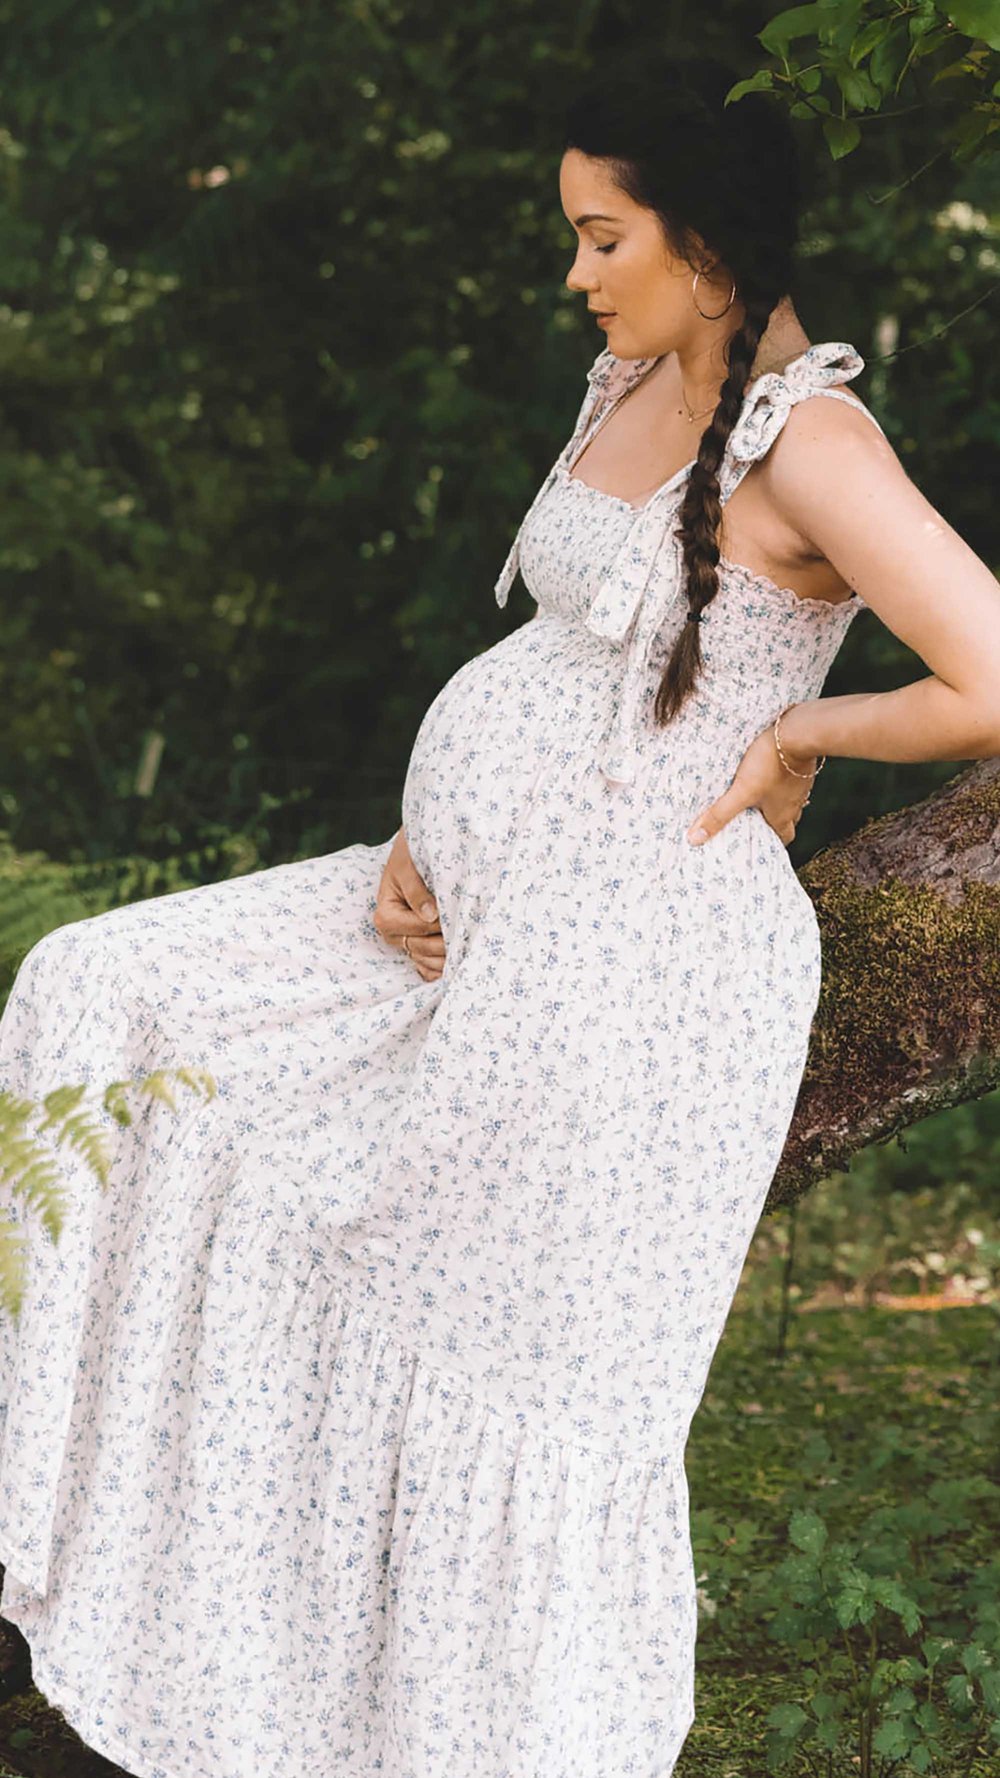 Casual Floral Maternity Dress Outfit. @sarahchristine wearing Nothing Fits Women’s Classic Nursing Momoka Dress with smocked chest in Seattle, Washington - 3.jpg